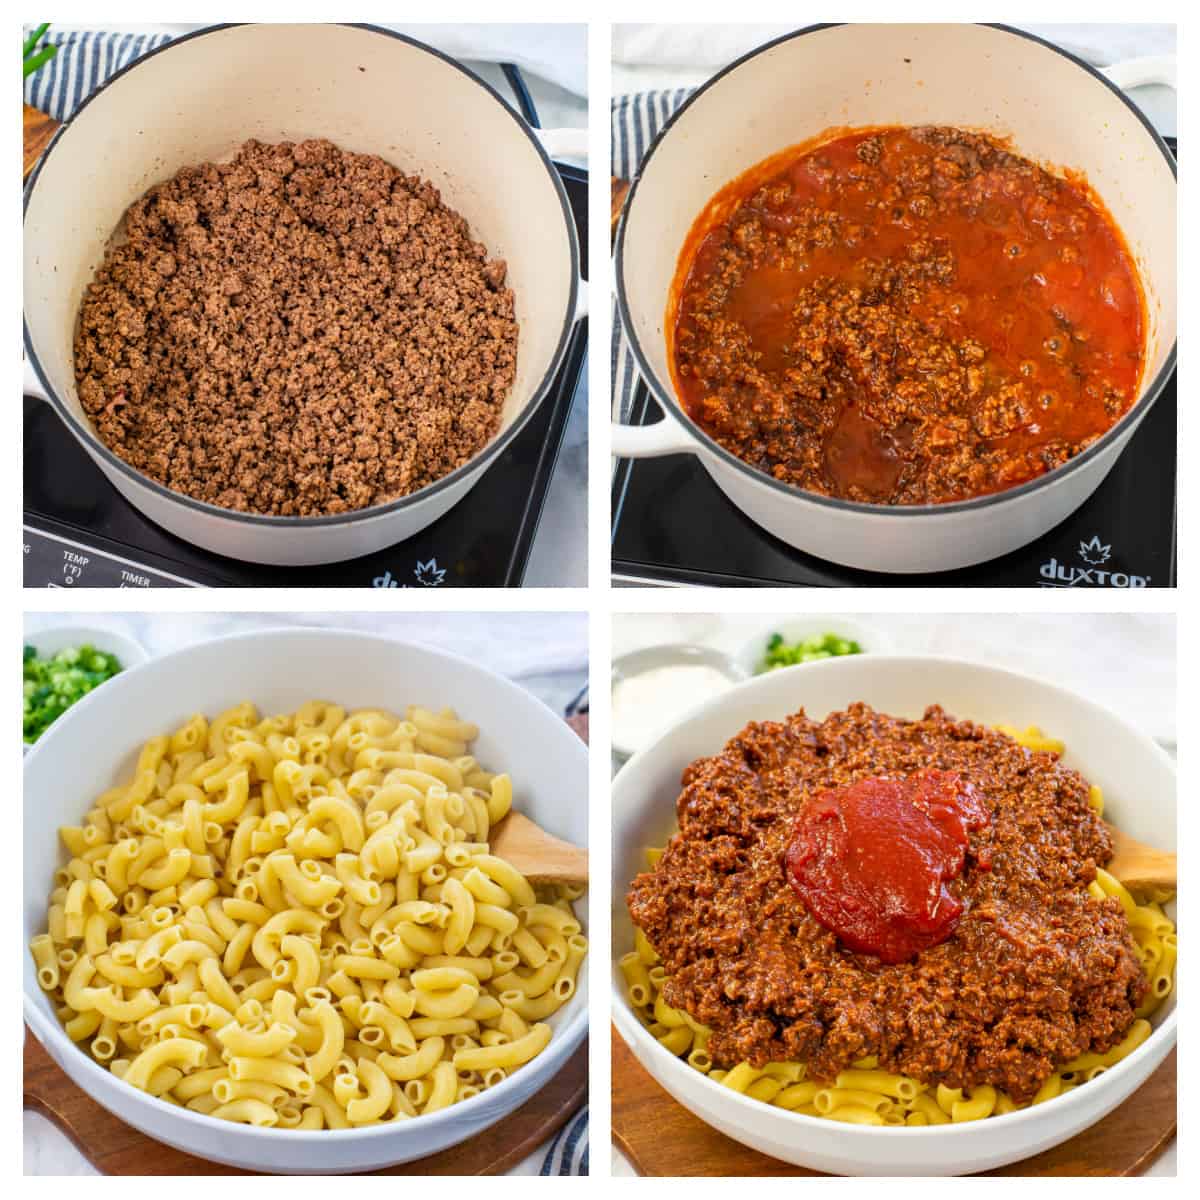 Collage showing how to make chili mac at home.